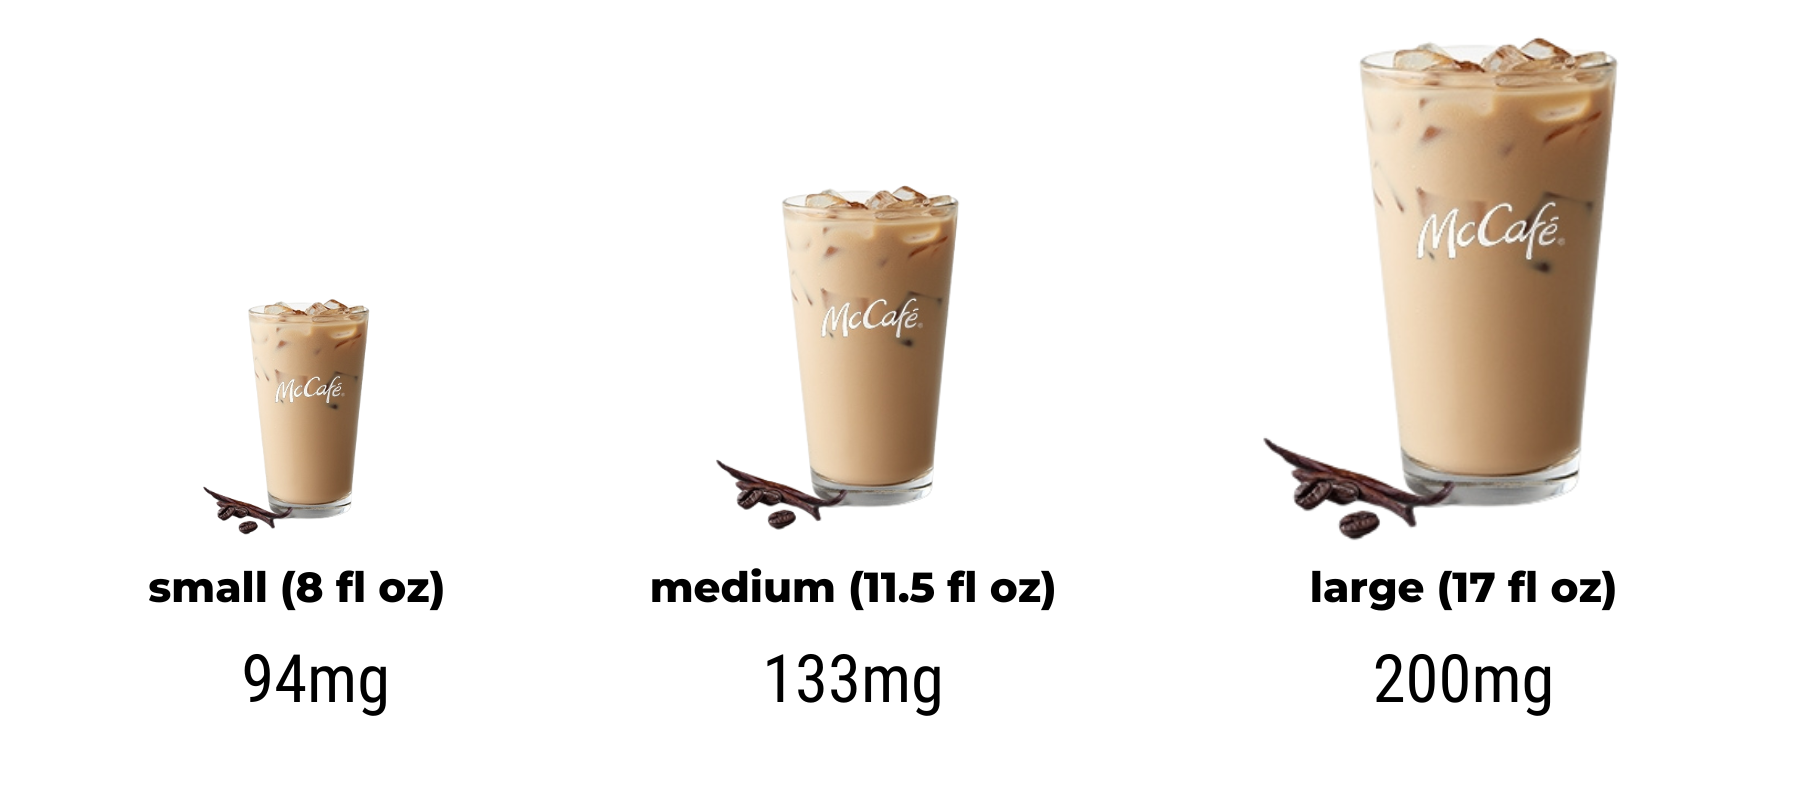 https://cdn.shopify.com/s/files/1/1365/5333/files/how_much_caffeine_in_mcdonalds_iced_coffee.png?v=1655055053